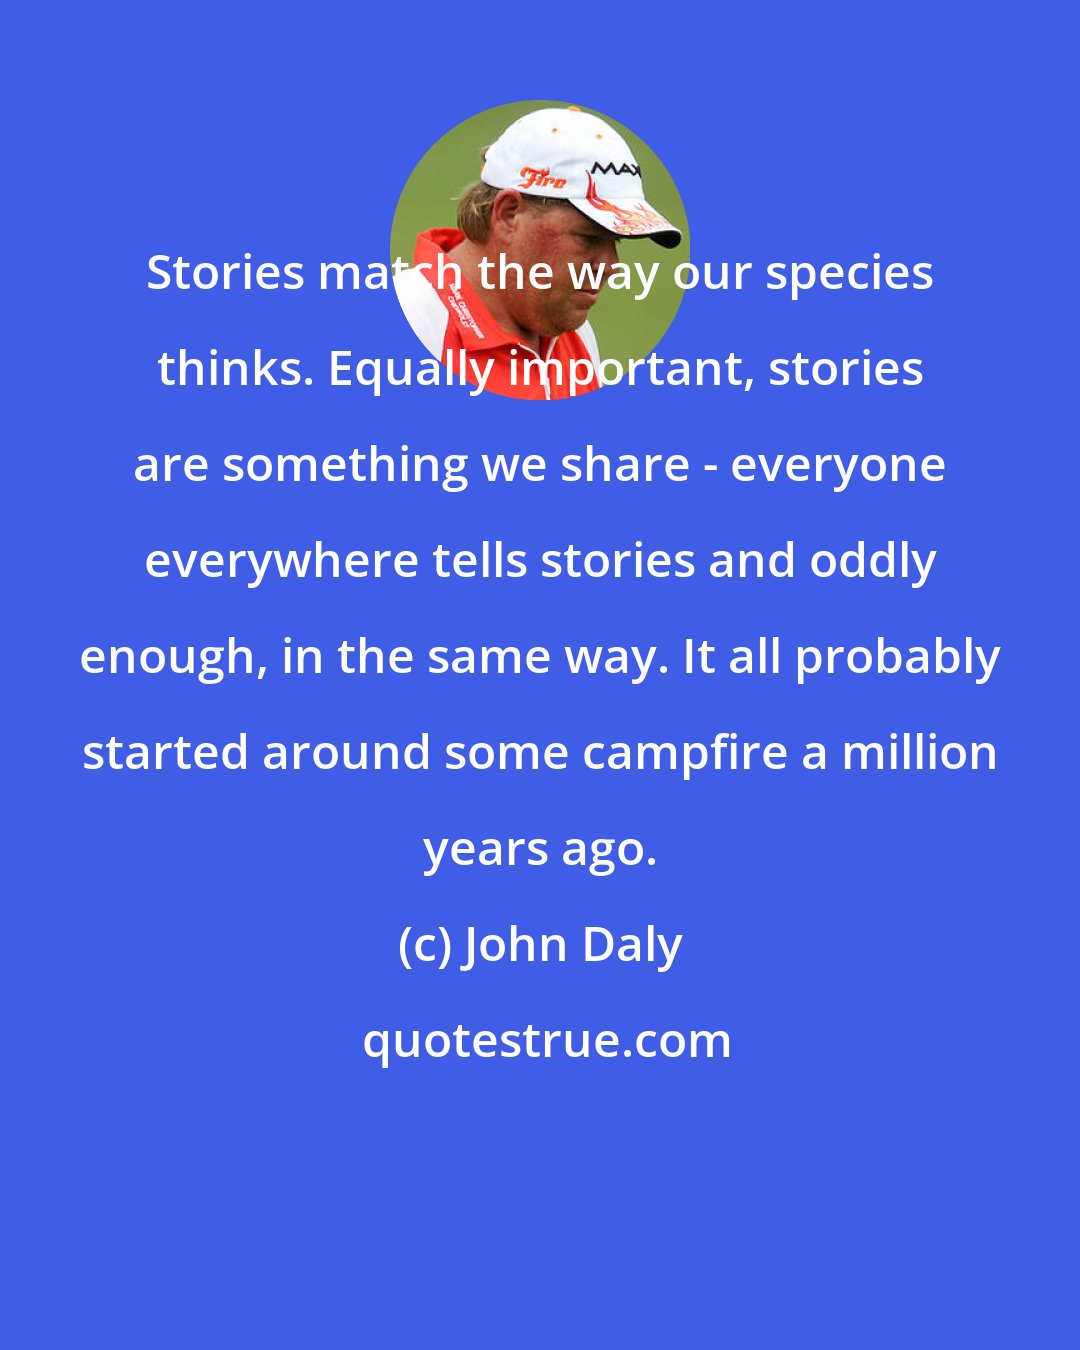 John Daly: Stories match the way our species thinks. Equally important, stories are something we share - everyone everywhere tells stories and oddly enough, in the same way. It all probably started around some campfire a million years ago.